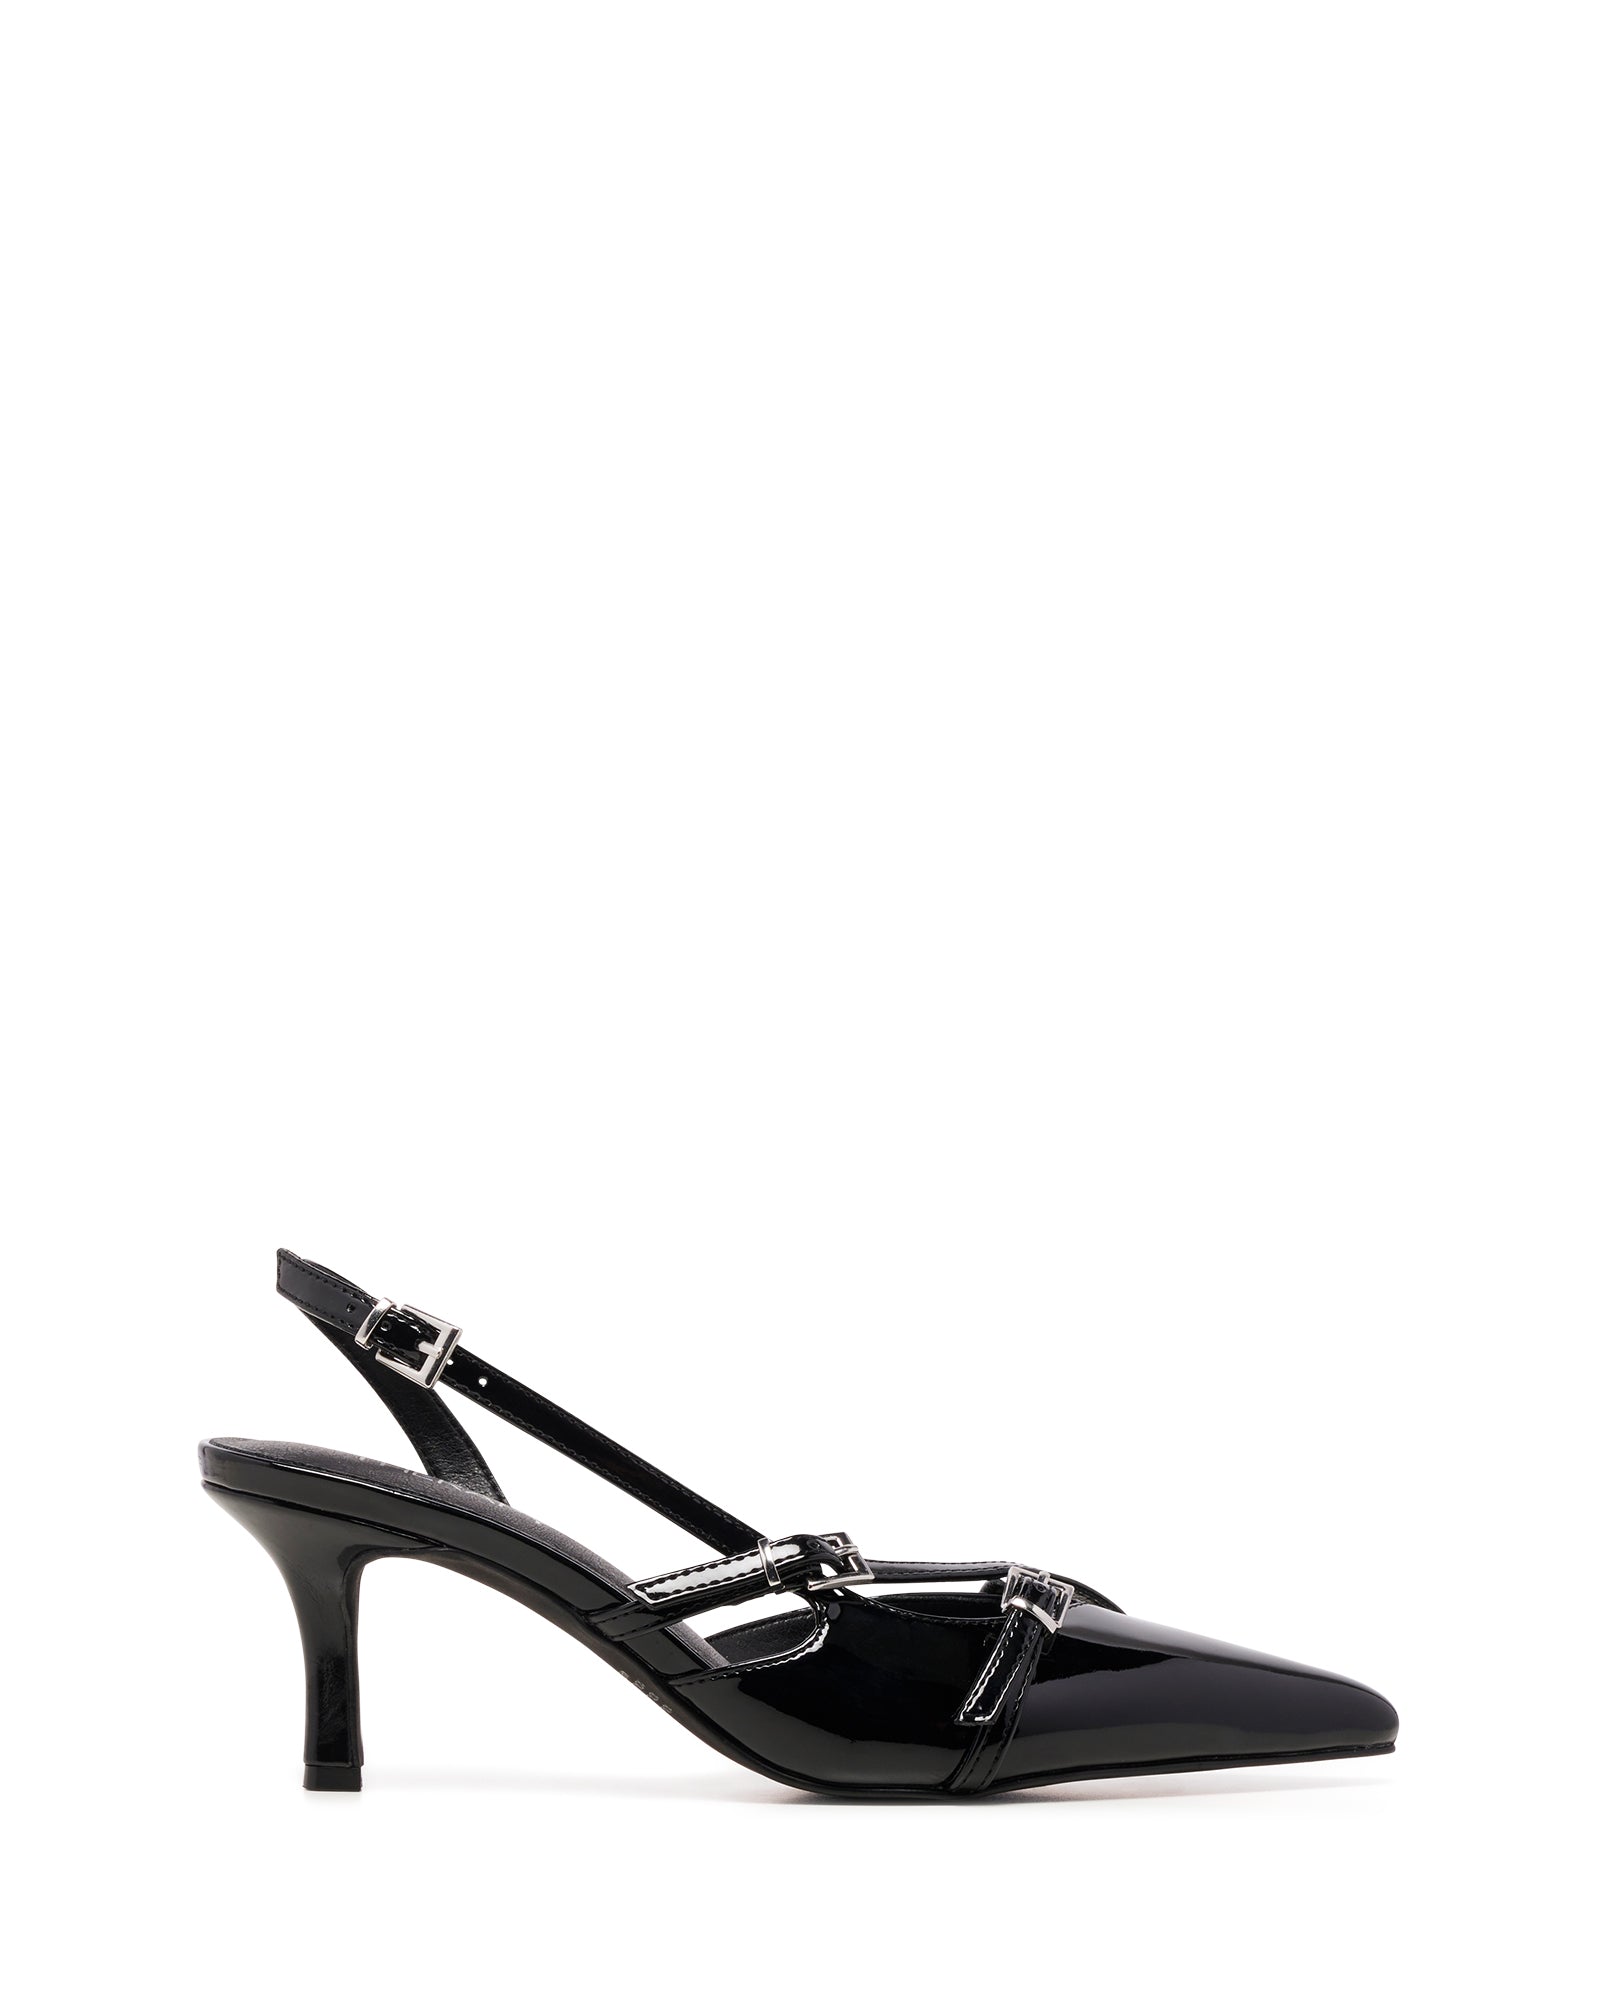 Juicy Slingback Pump Black Patent- PRE ORDER DUE FOR DISPATCH APPROX 25 MAY